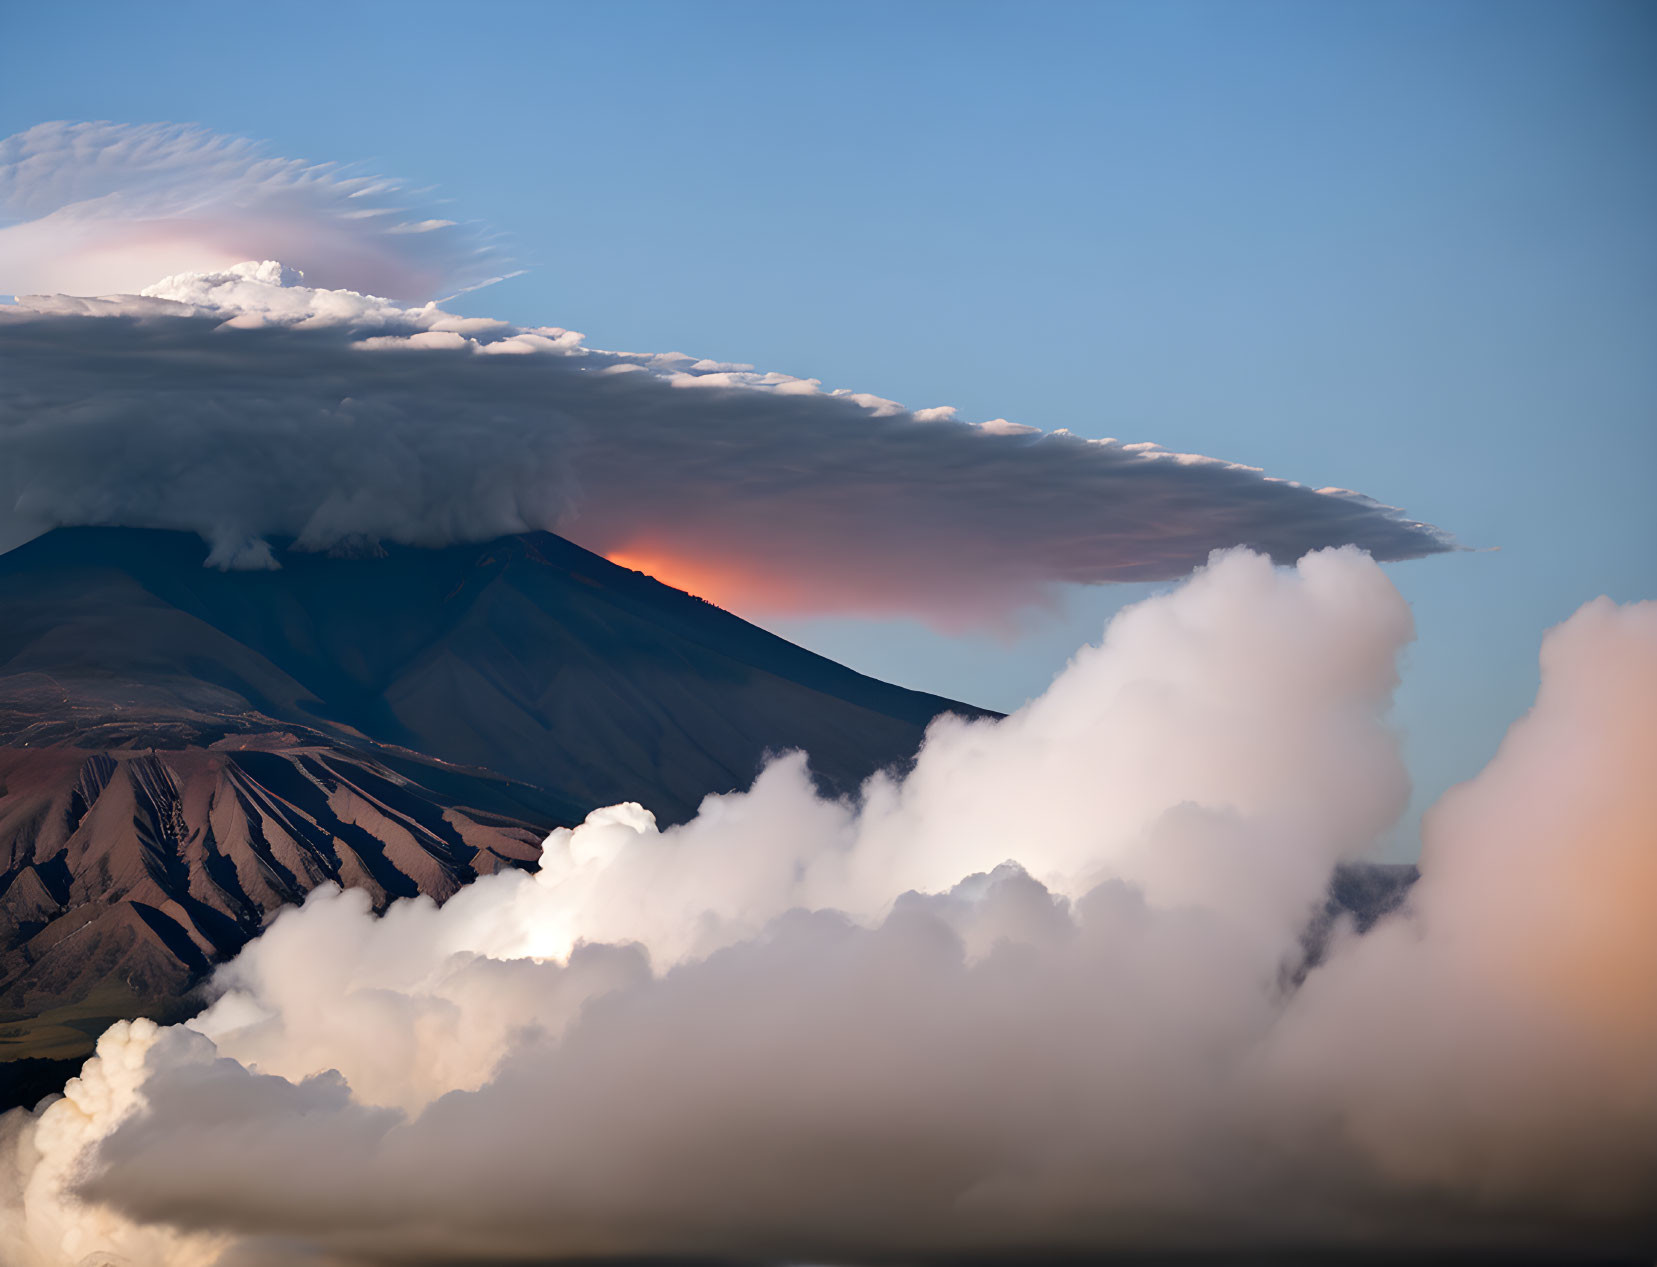 Majestic mountain peak with striking cloud formation at sunset